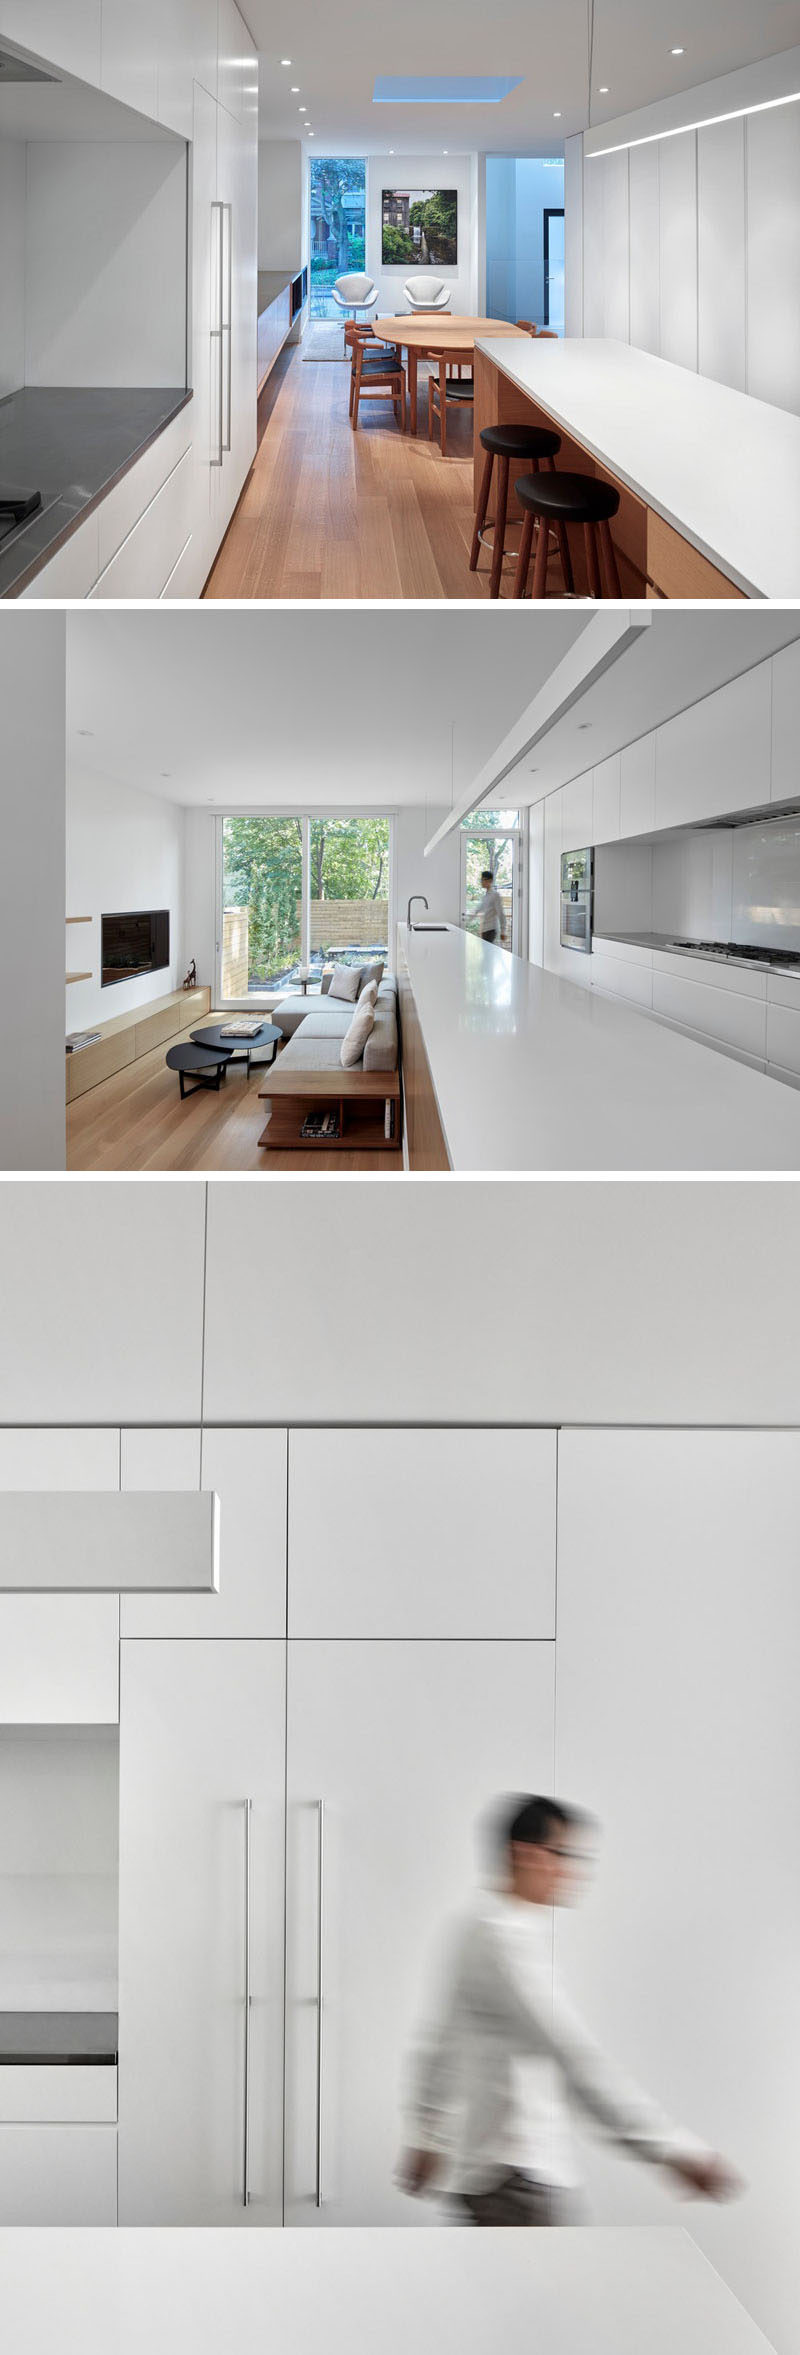 White minimalist cabinets fill the wall, and a long kitchen island with space for seating provides a backdrop for the living room that's stepped down from the kitchen. #WhiteKitchen #MinimalistKitchen #LivingRoom